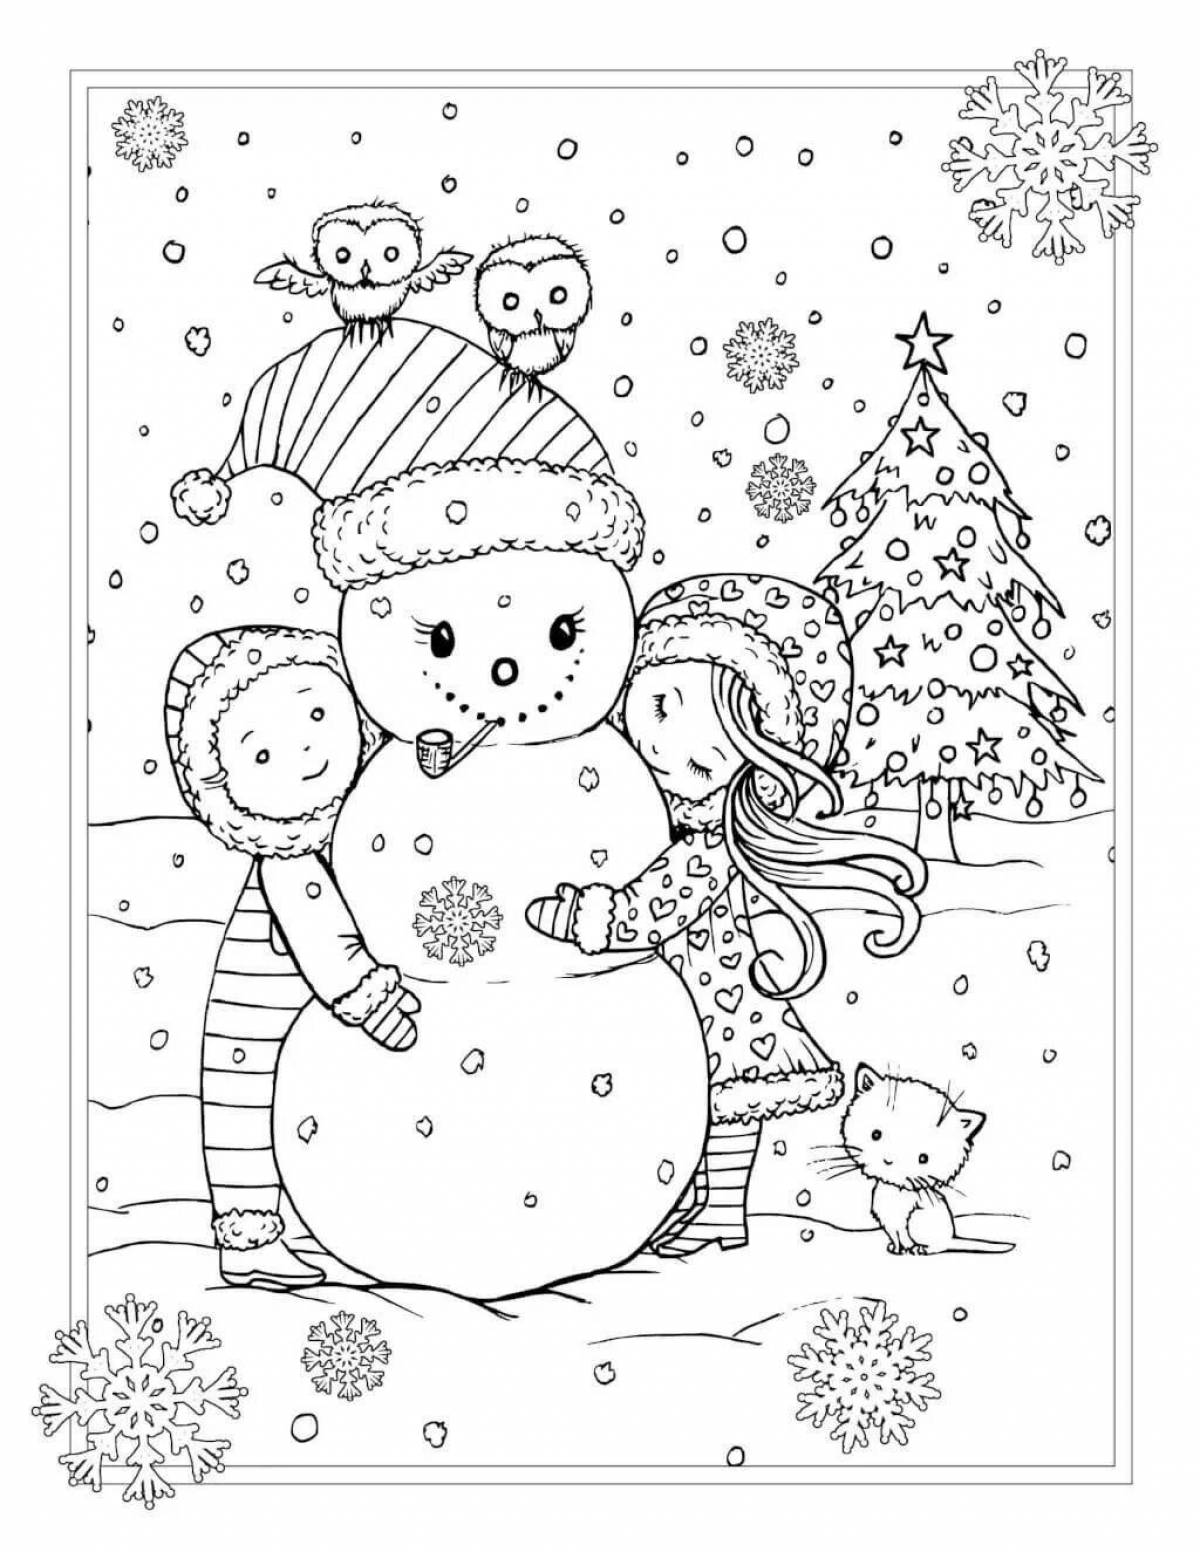 Intriguing winter coloring book